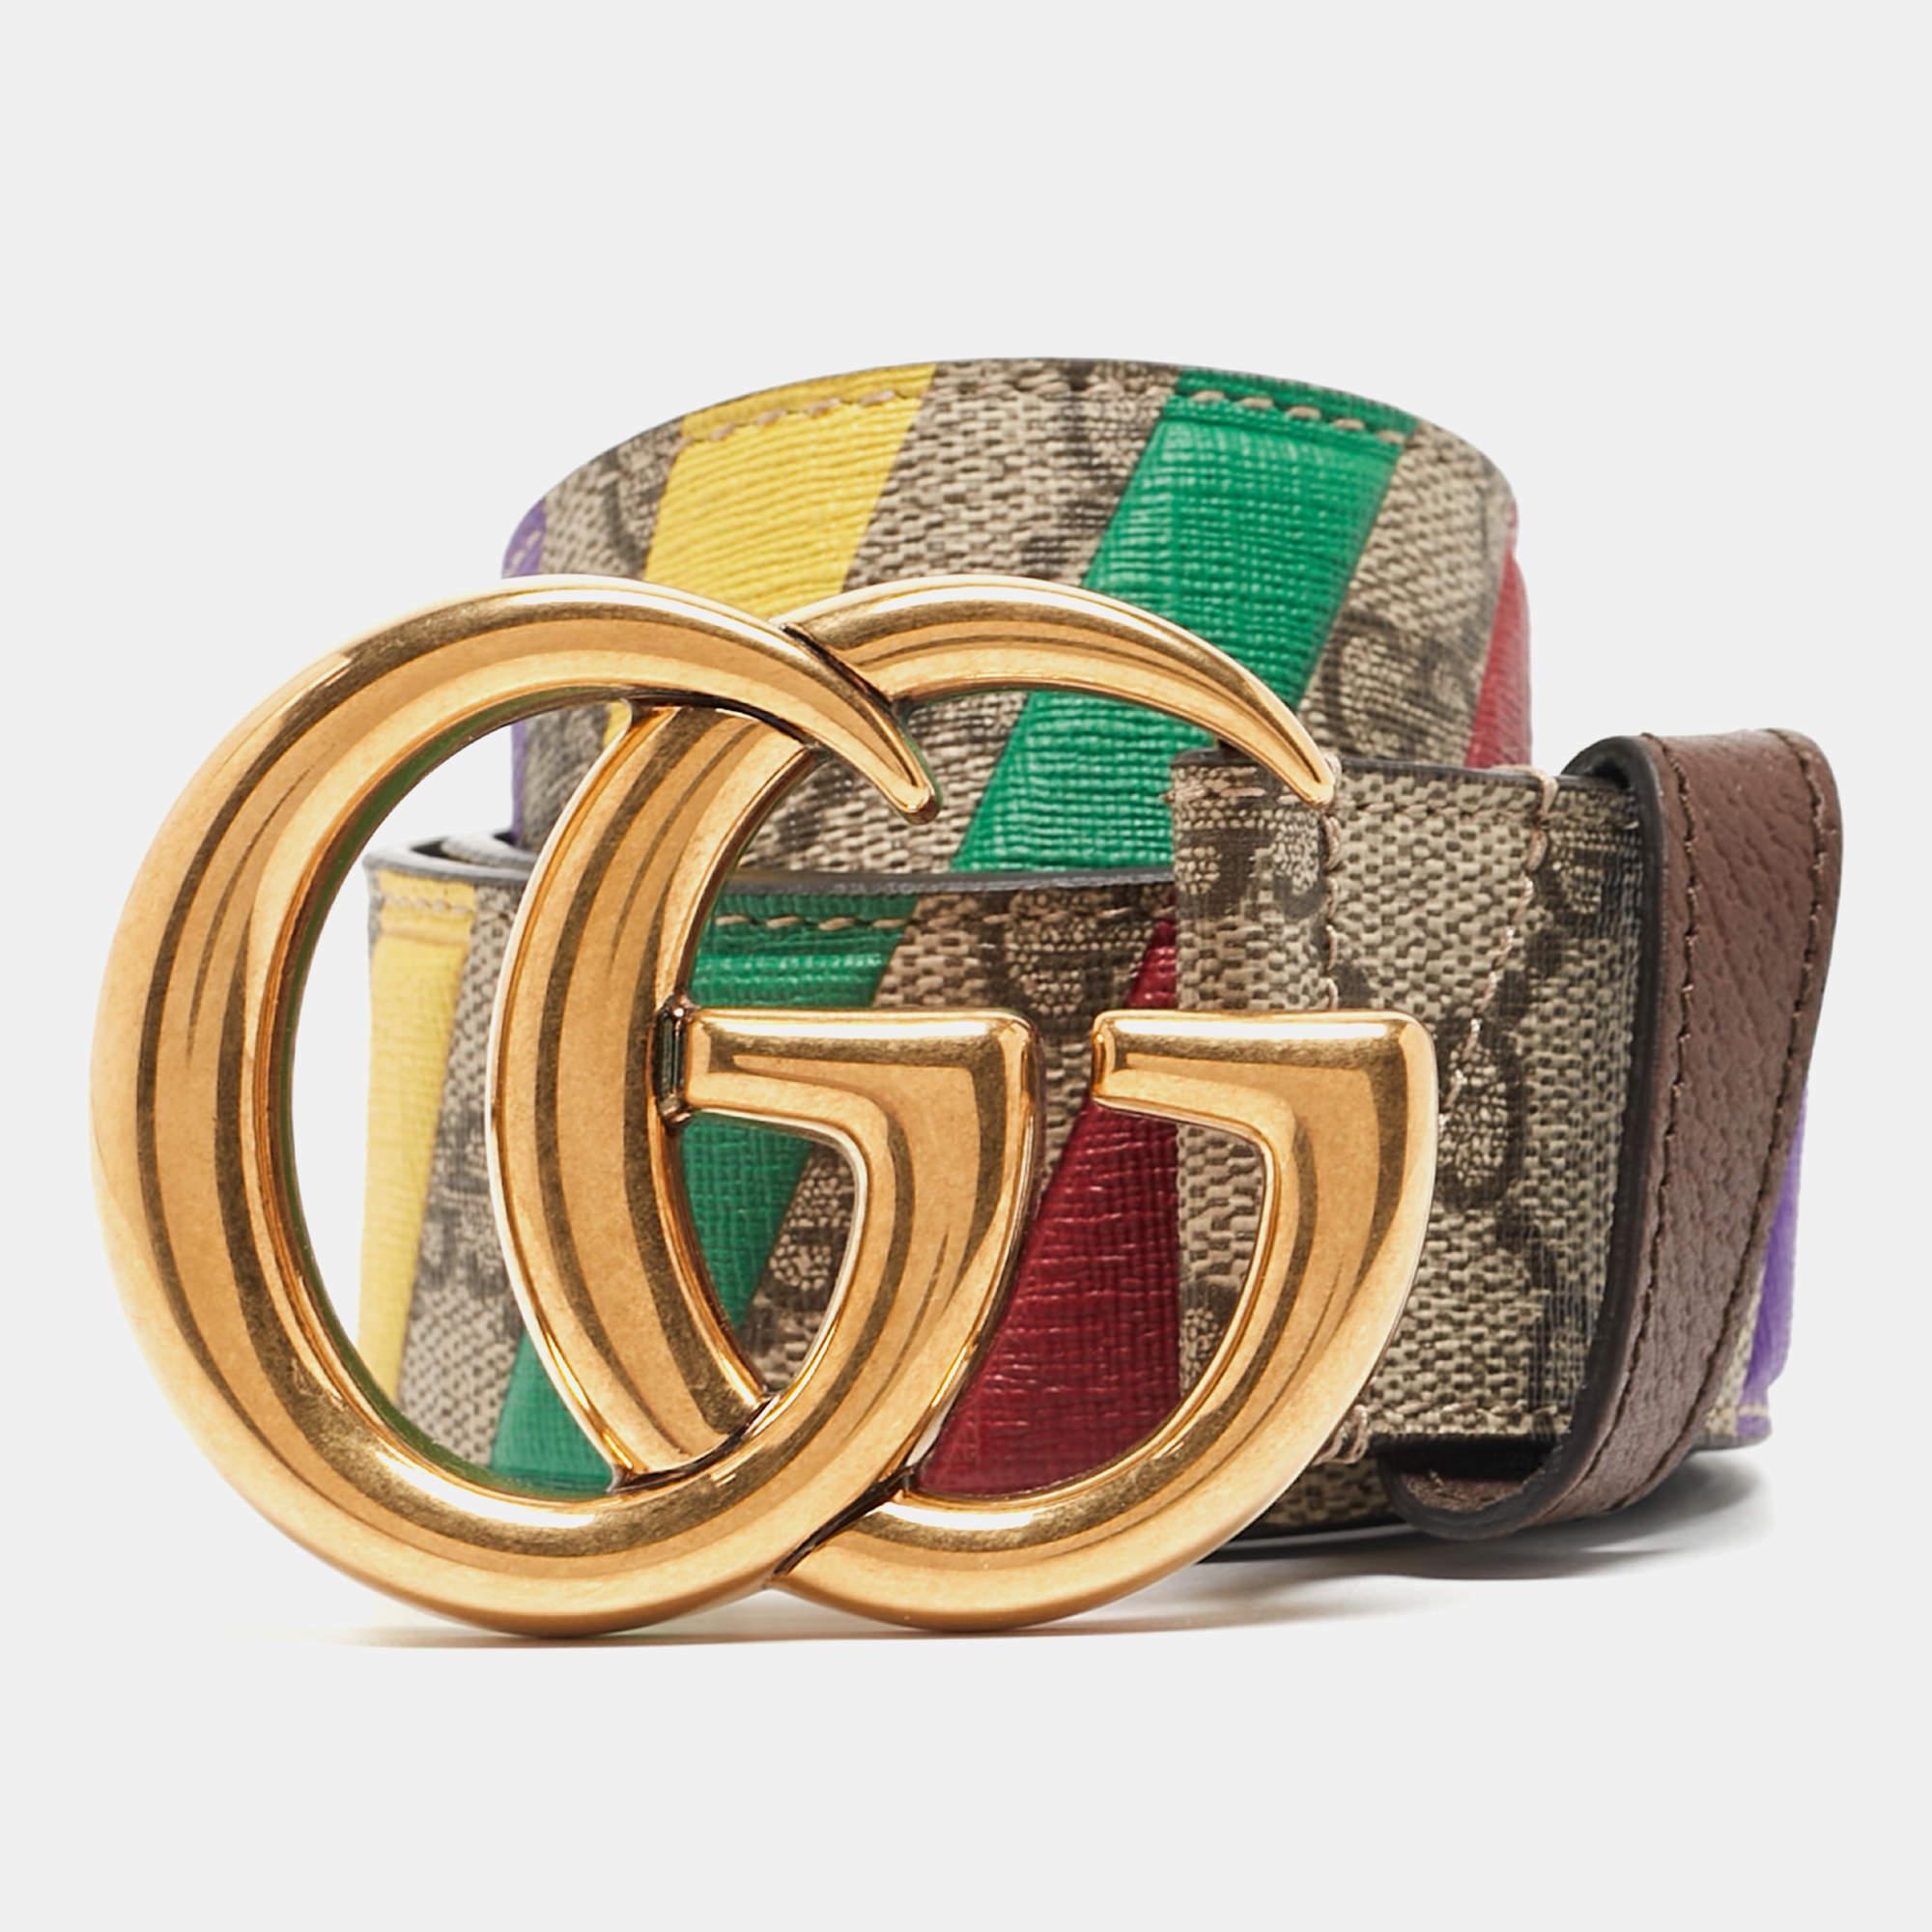 The Gucci belt epitomizes luxury with its iconic GG Supreme canvas adorned with a bold stripe and double G buckle. Crafted with meticulous attention to detail, it effortlessly combines sophistication, style, and timeless elegance for the discerning